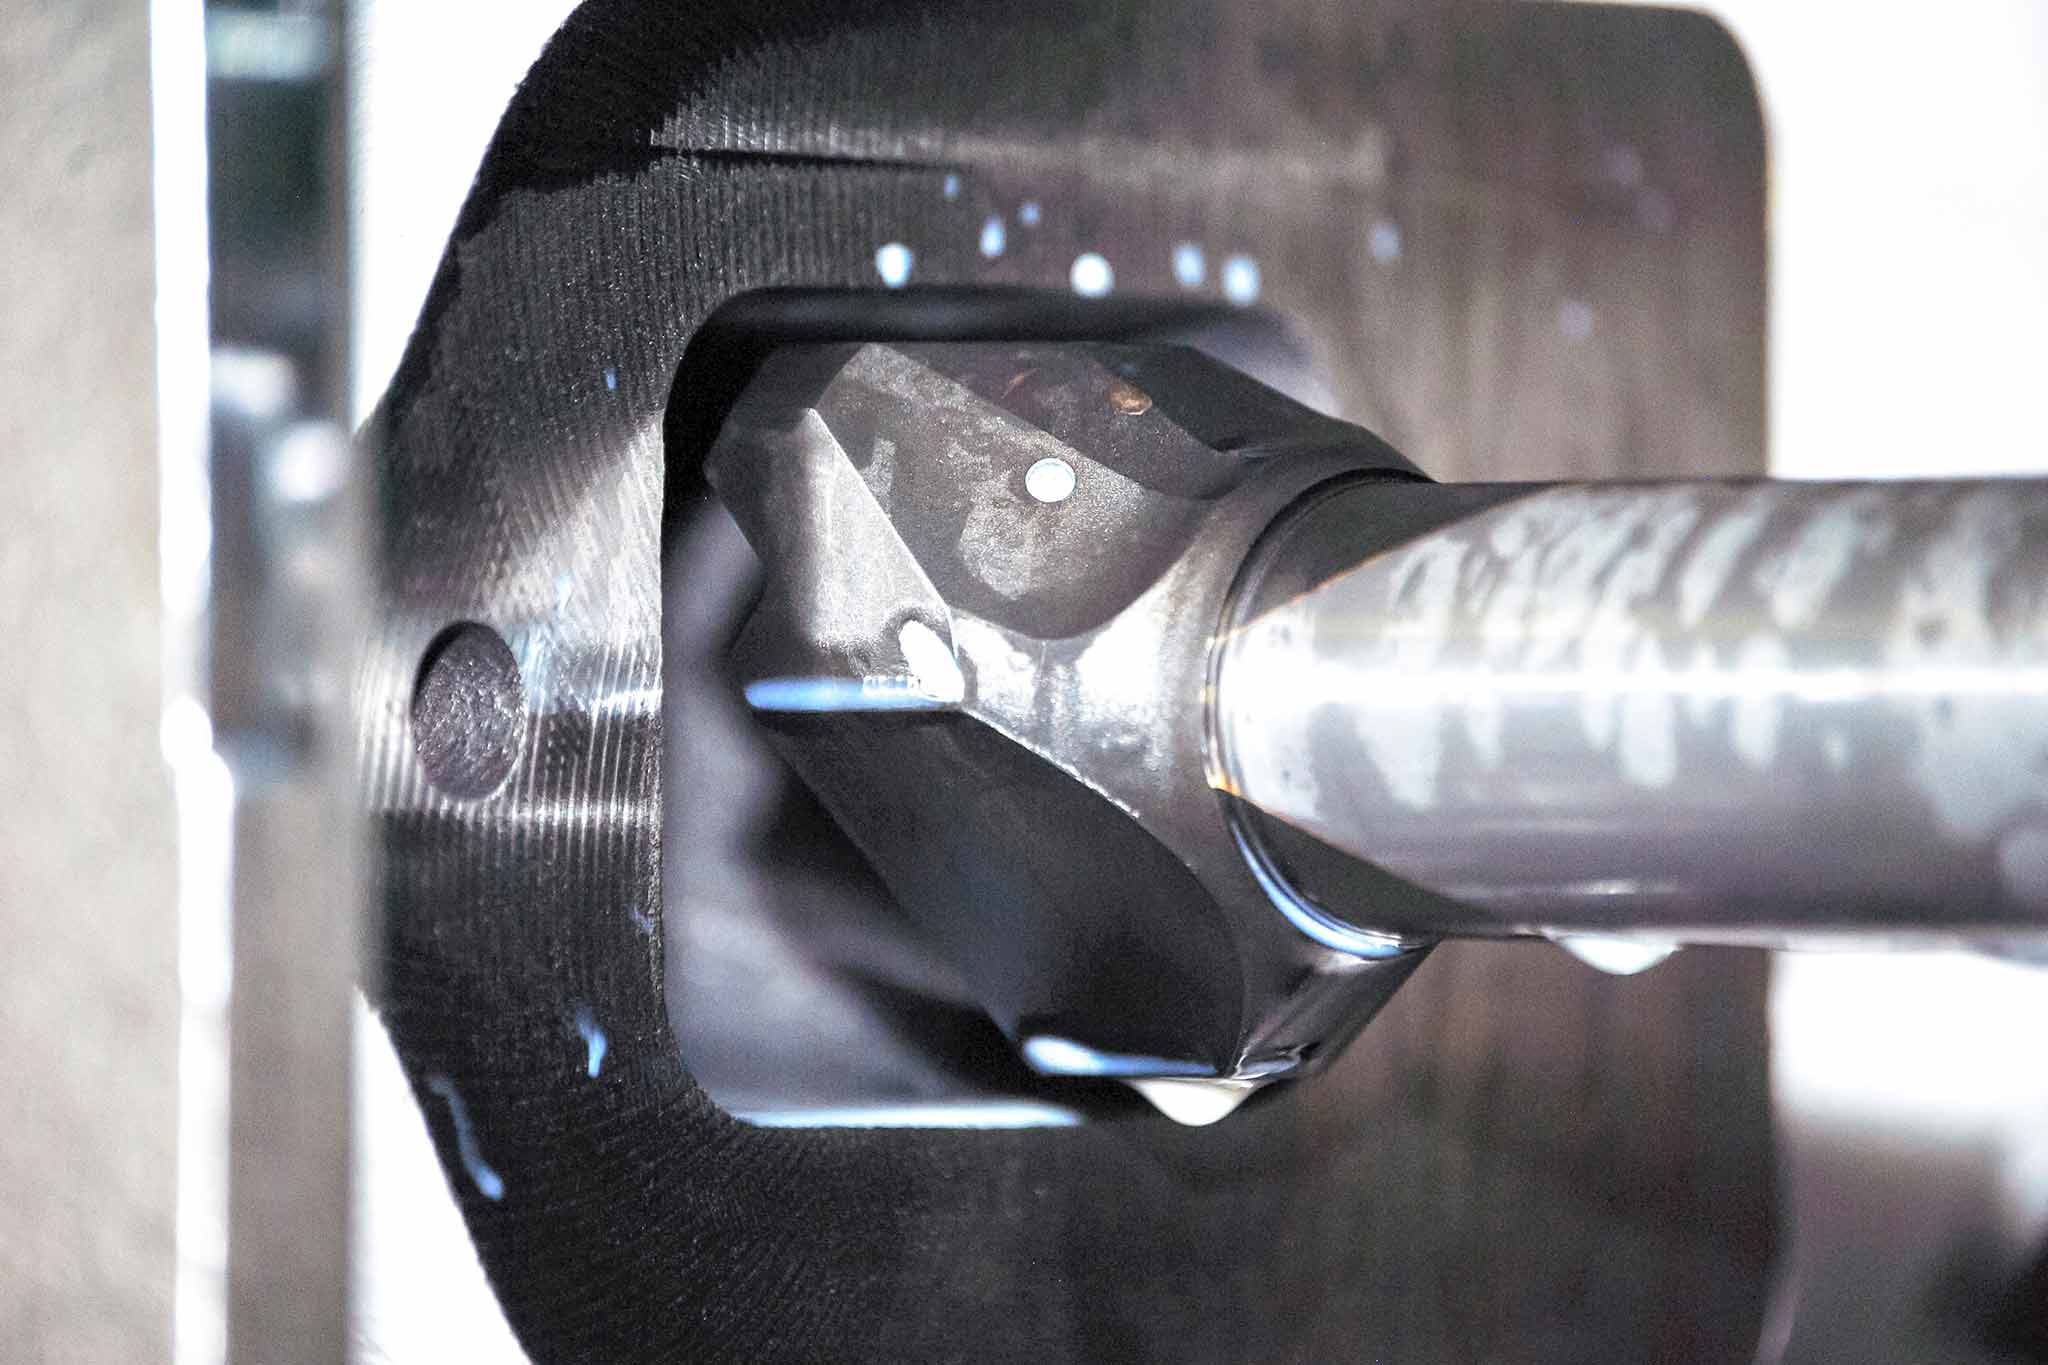 The face milling cutter when entering the workpiece via the inlet opening.